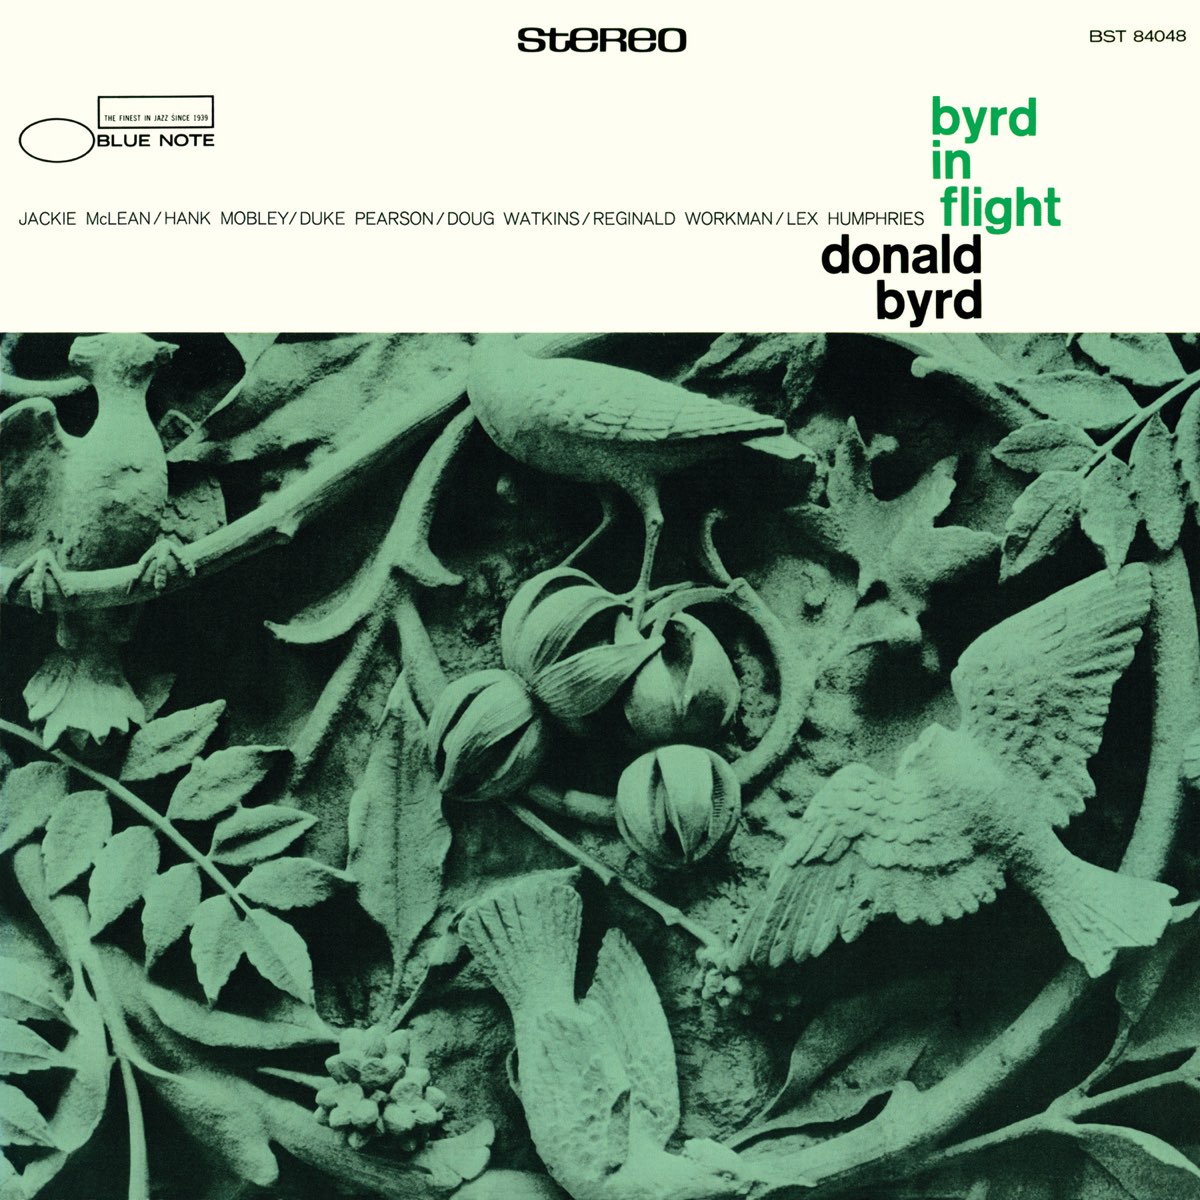 DONALD BYRD – BYRD IN FLIGHT projazz.net/donald-byrd-by… An album by Donald Byrd recorded in 1960 and released on the Blue Note label featuring Byrd with Jackie McLean or Hank Mobley, Duke Pearson, Doug Watkins or Reggie Workman, and Lex Humphries. #DonaldByrd #trumpet #hardbop